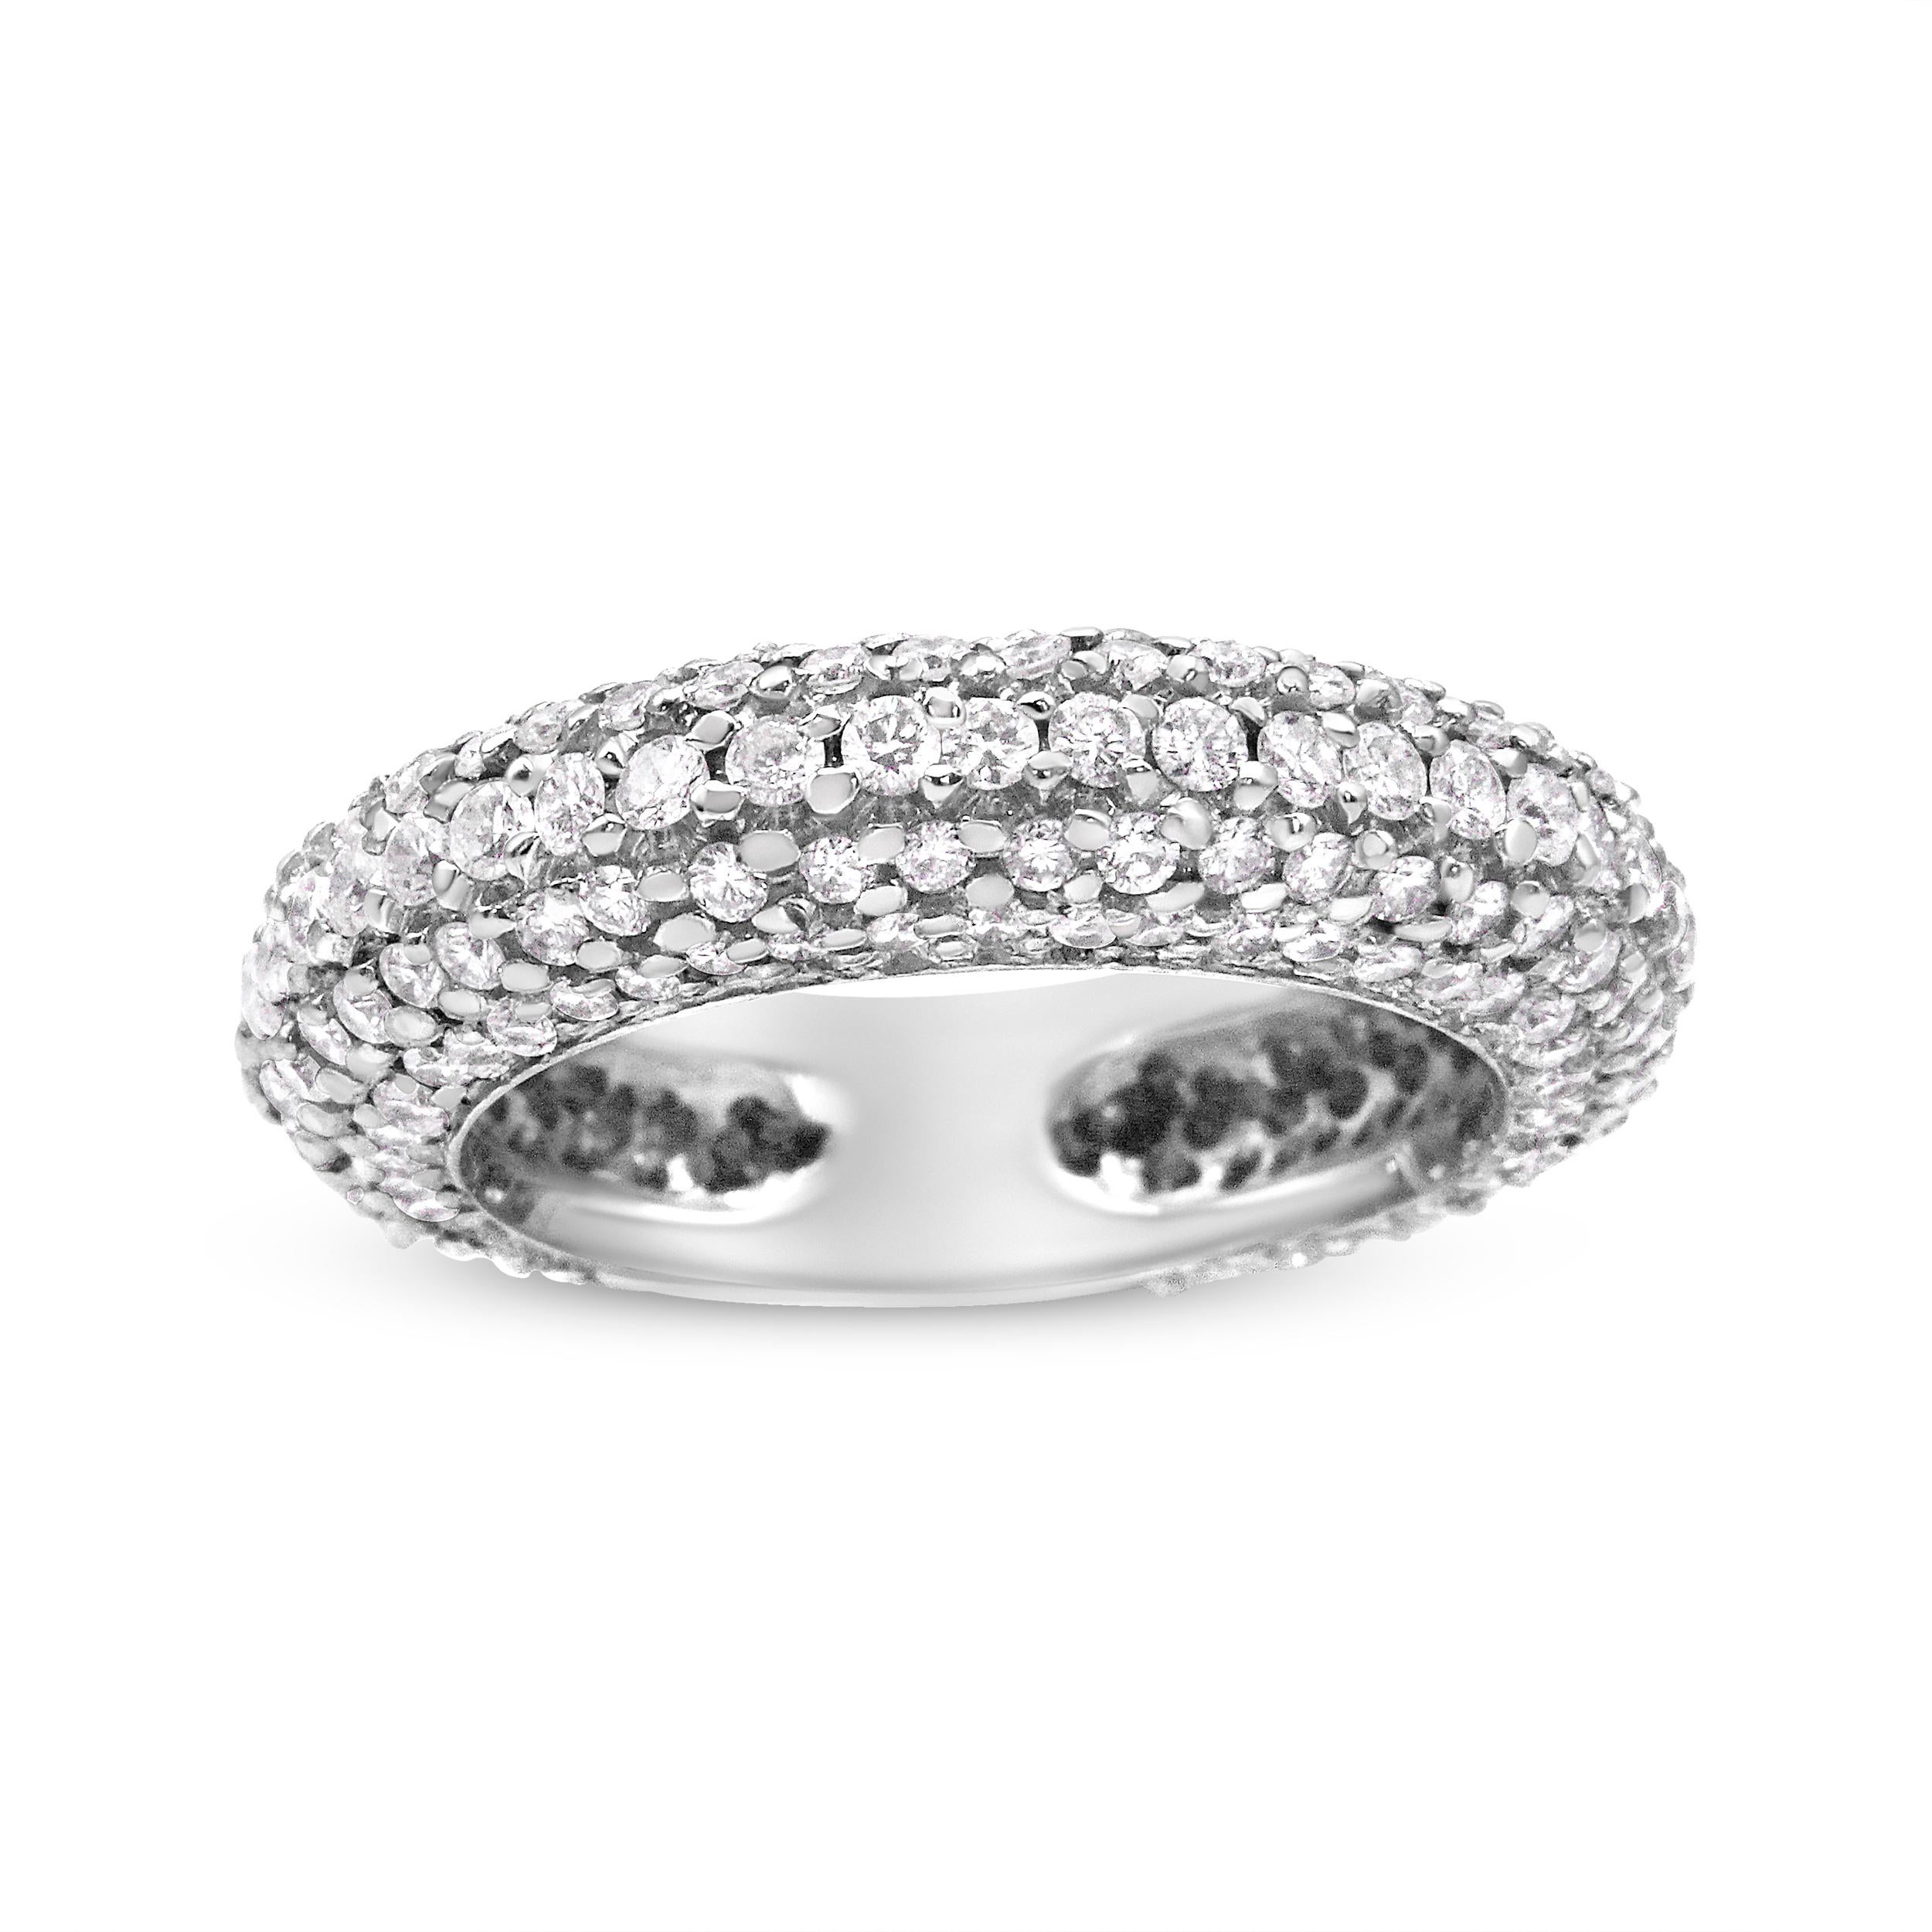 Beautifully designed, this gold band is embellished with sparkling and natural diamonds all along the sides, giving it a mesmerizing look! The round-cut diamonds line the entire ring and have a stunning SI1-SI2 clarity. The band is crafted in 14k